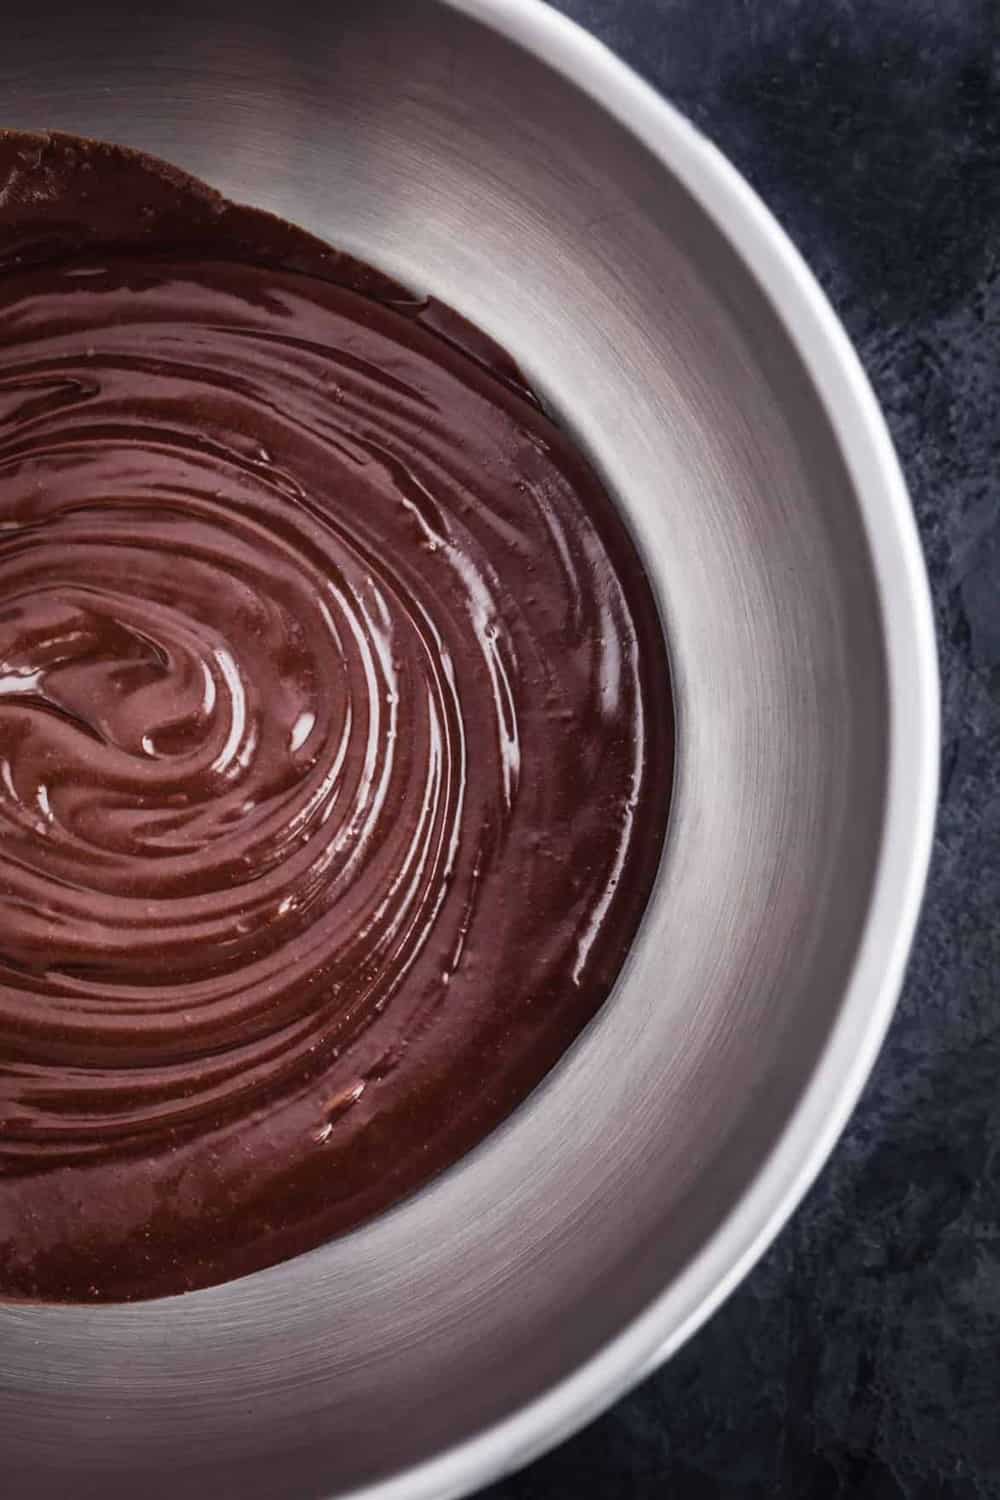 Chocolate ganache is mixed together.